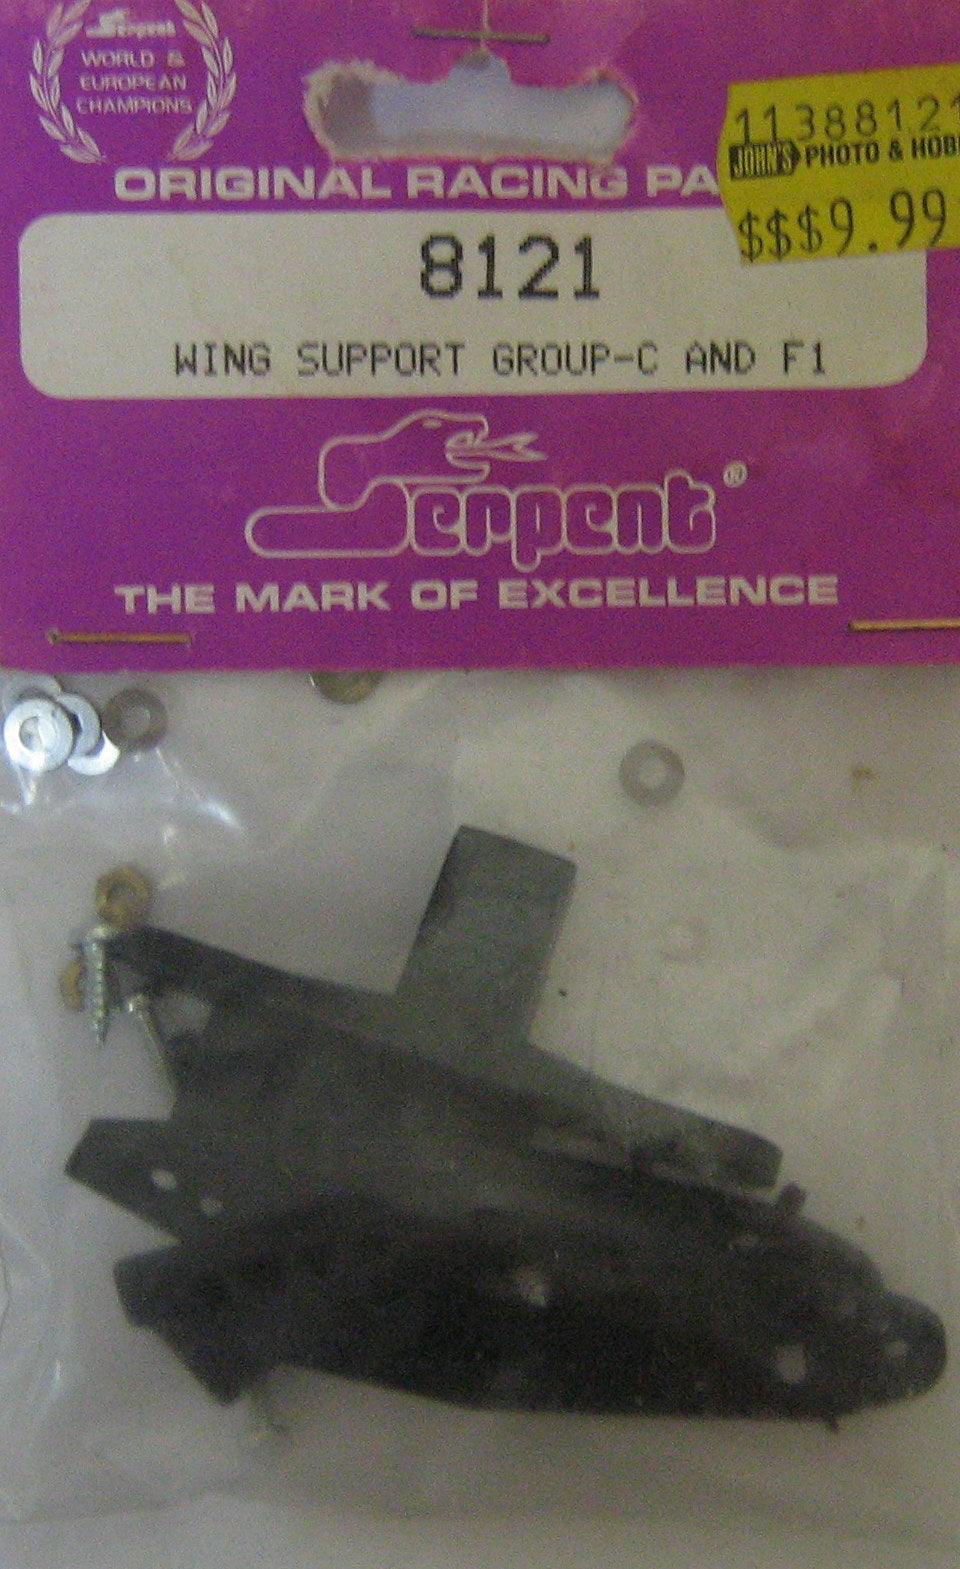 SERPENT # 8121 - WING SUPPORT